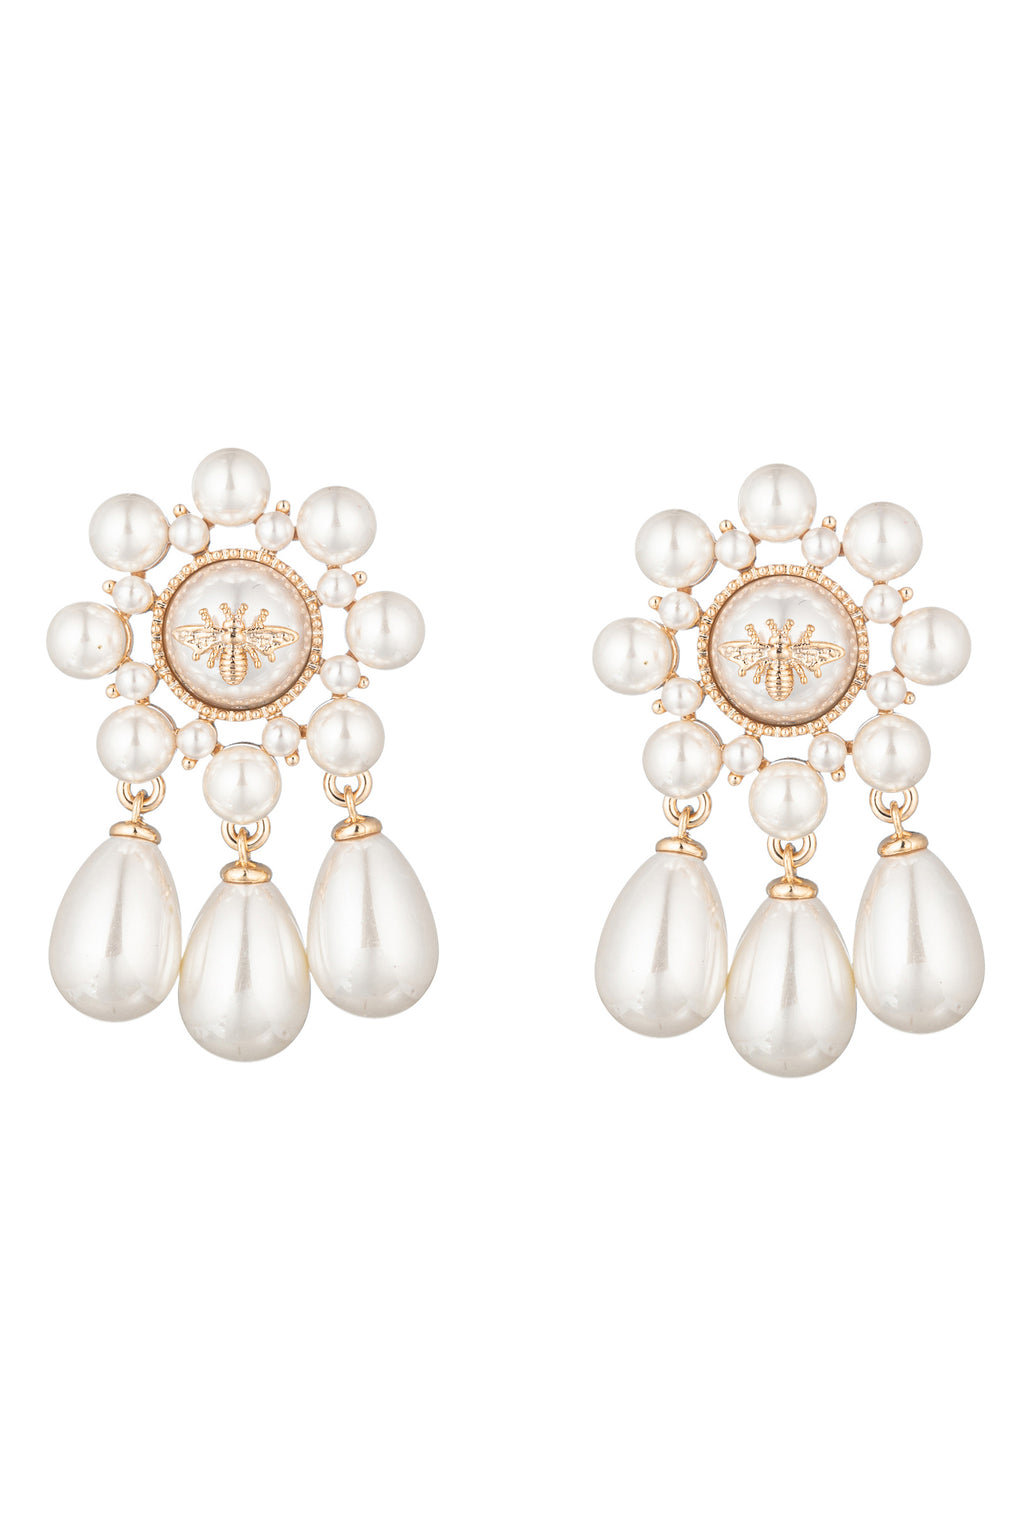 Gold tone brass glass pearl earrings with CZ crystal butterfly pendants.